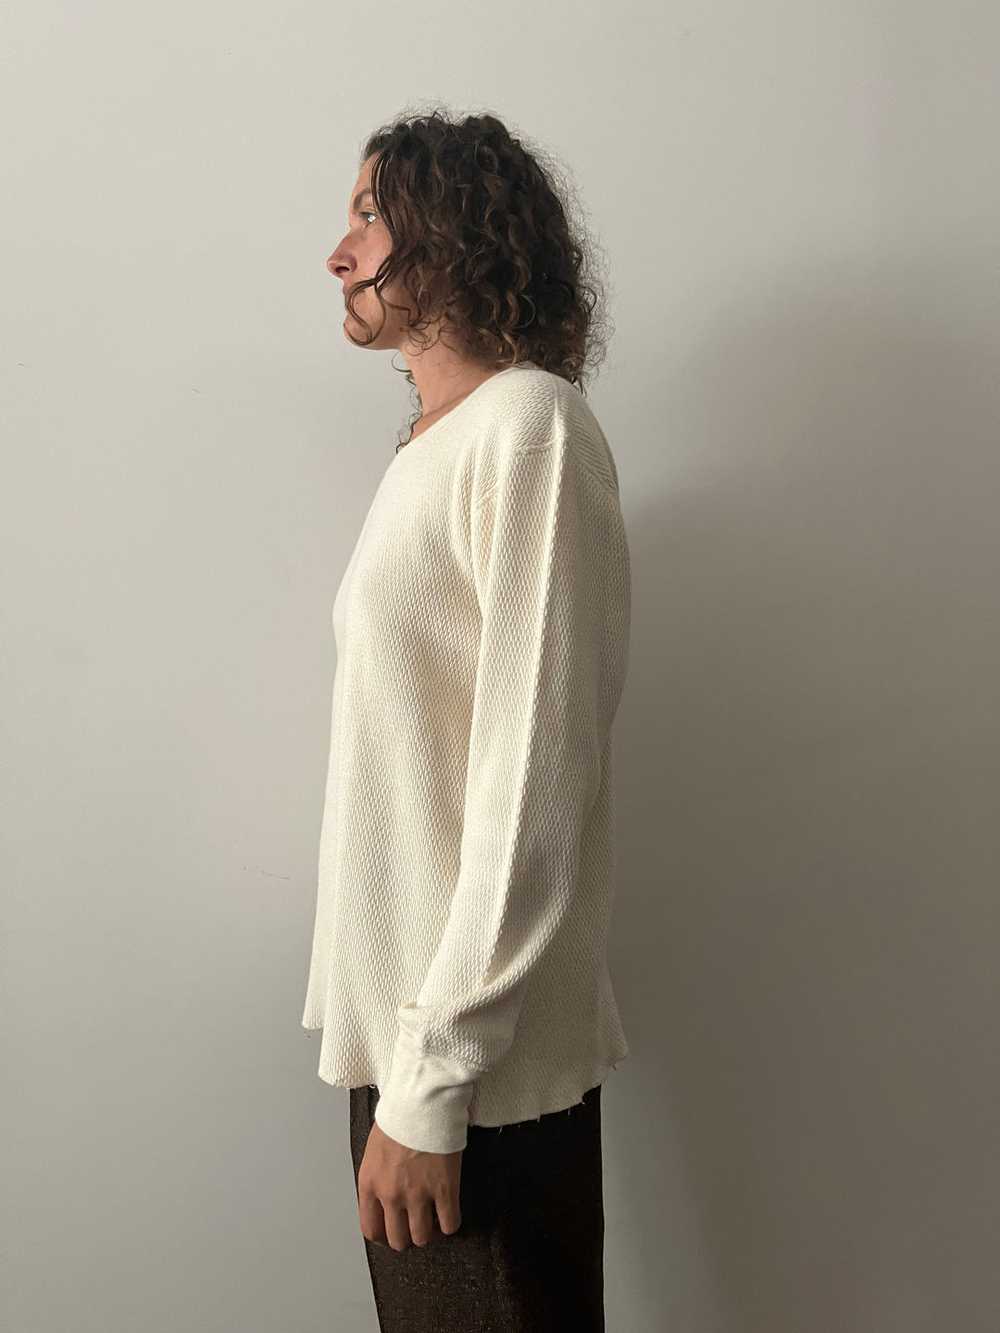 70s/80s Cotton Thermal Shirt - image 2